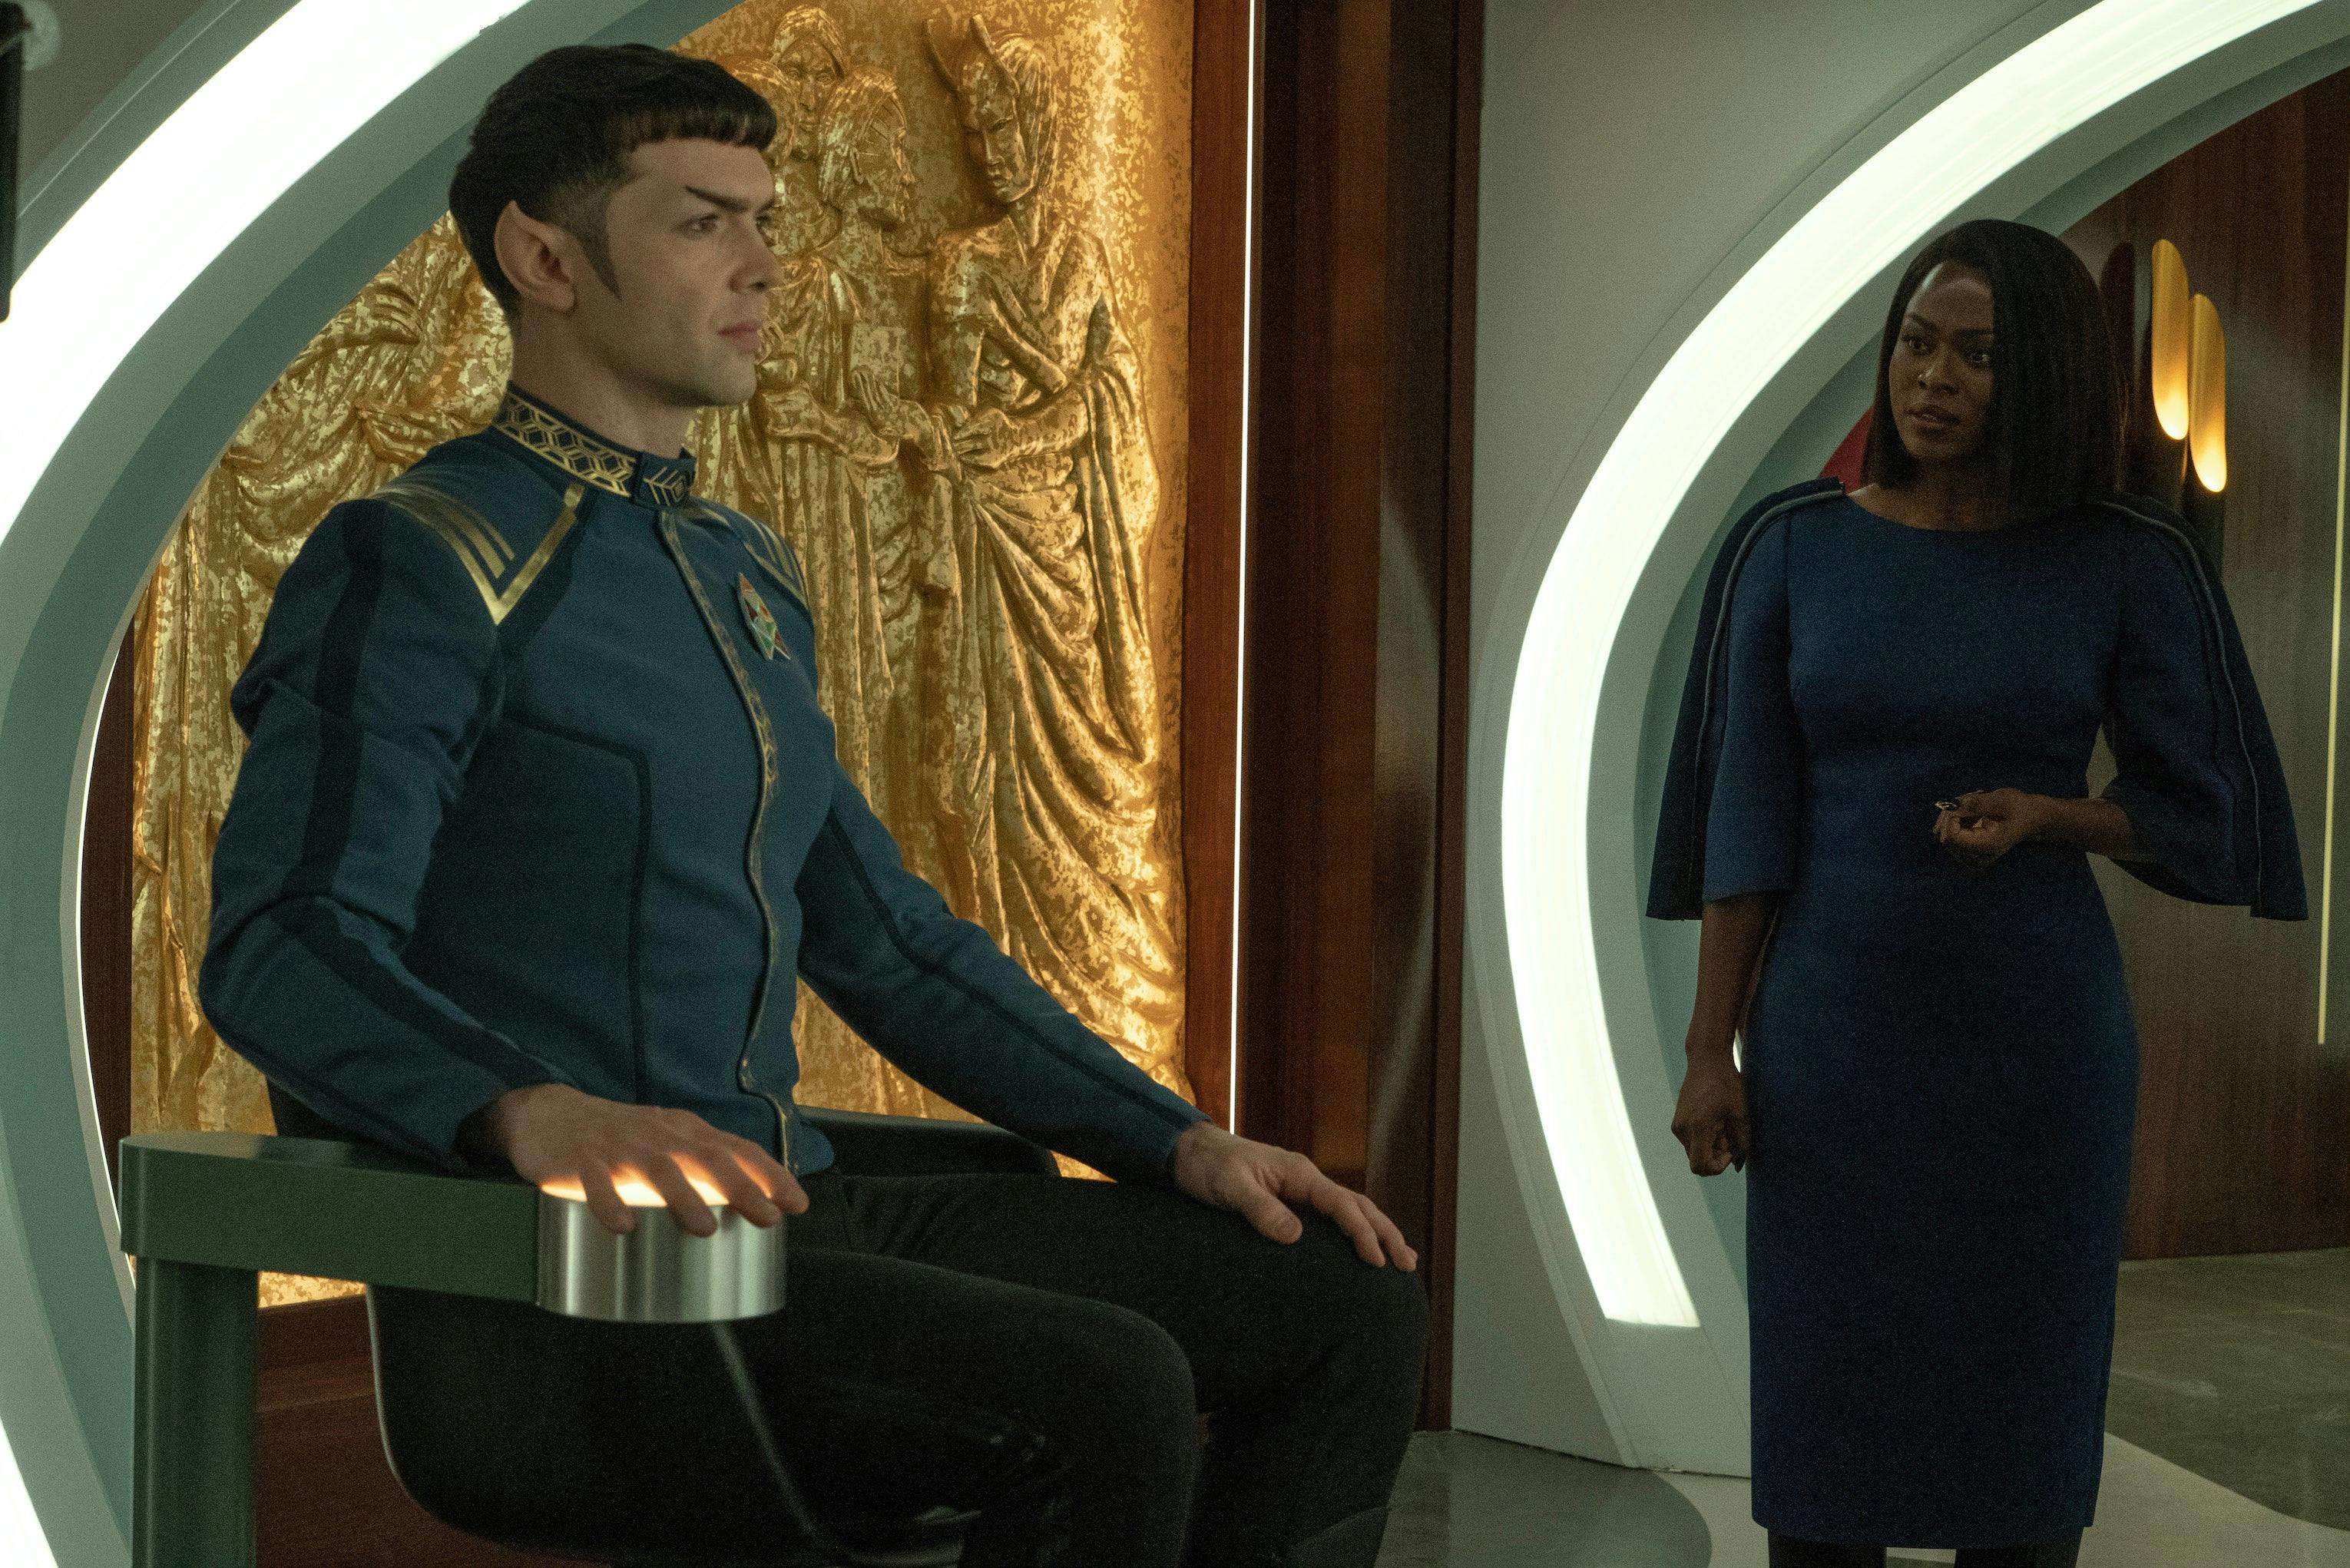 Neera Ketoul examines Spock as he takes the stand at trial in 'Ad Astra per Aspera'